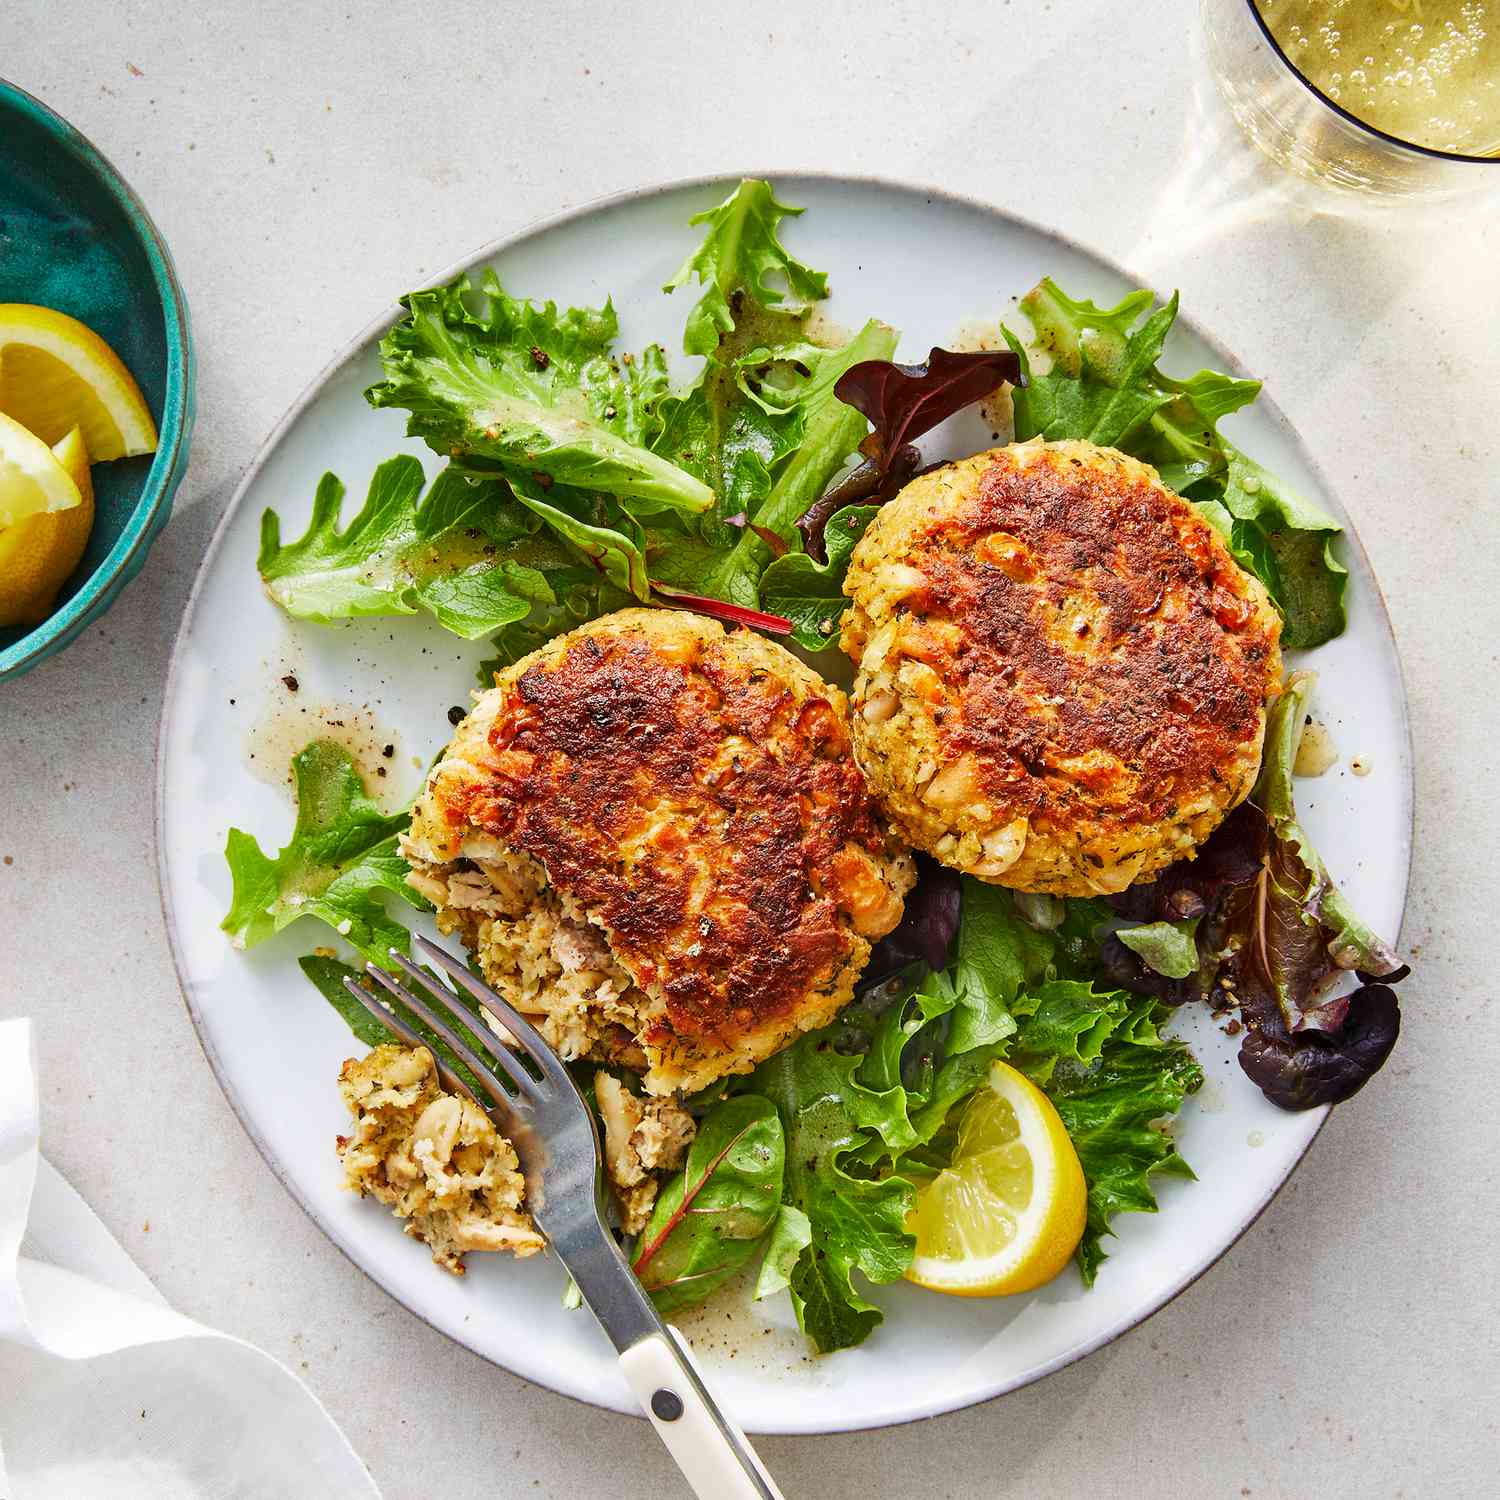 Easy Herby Tuna Cakes over Greens